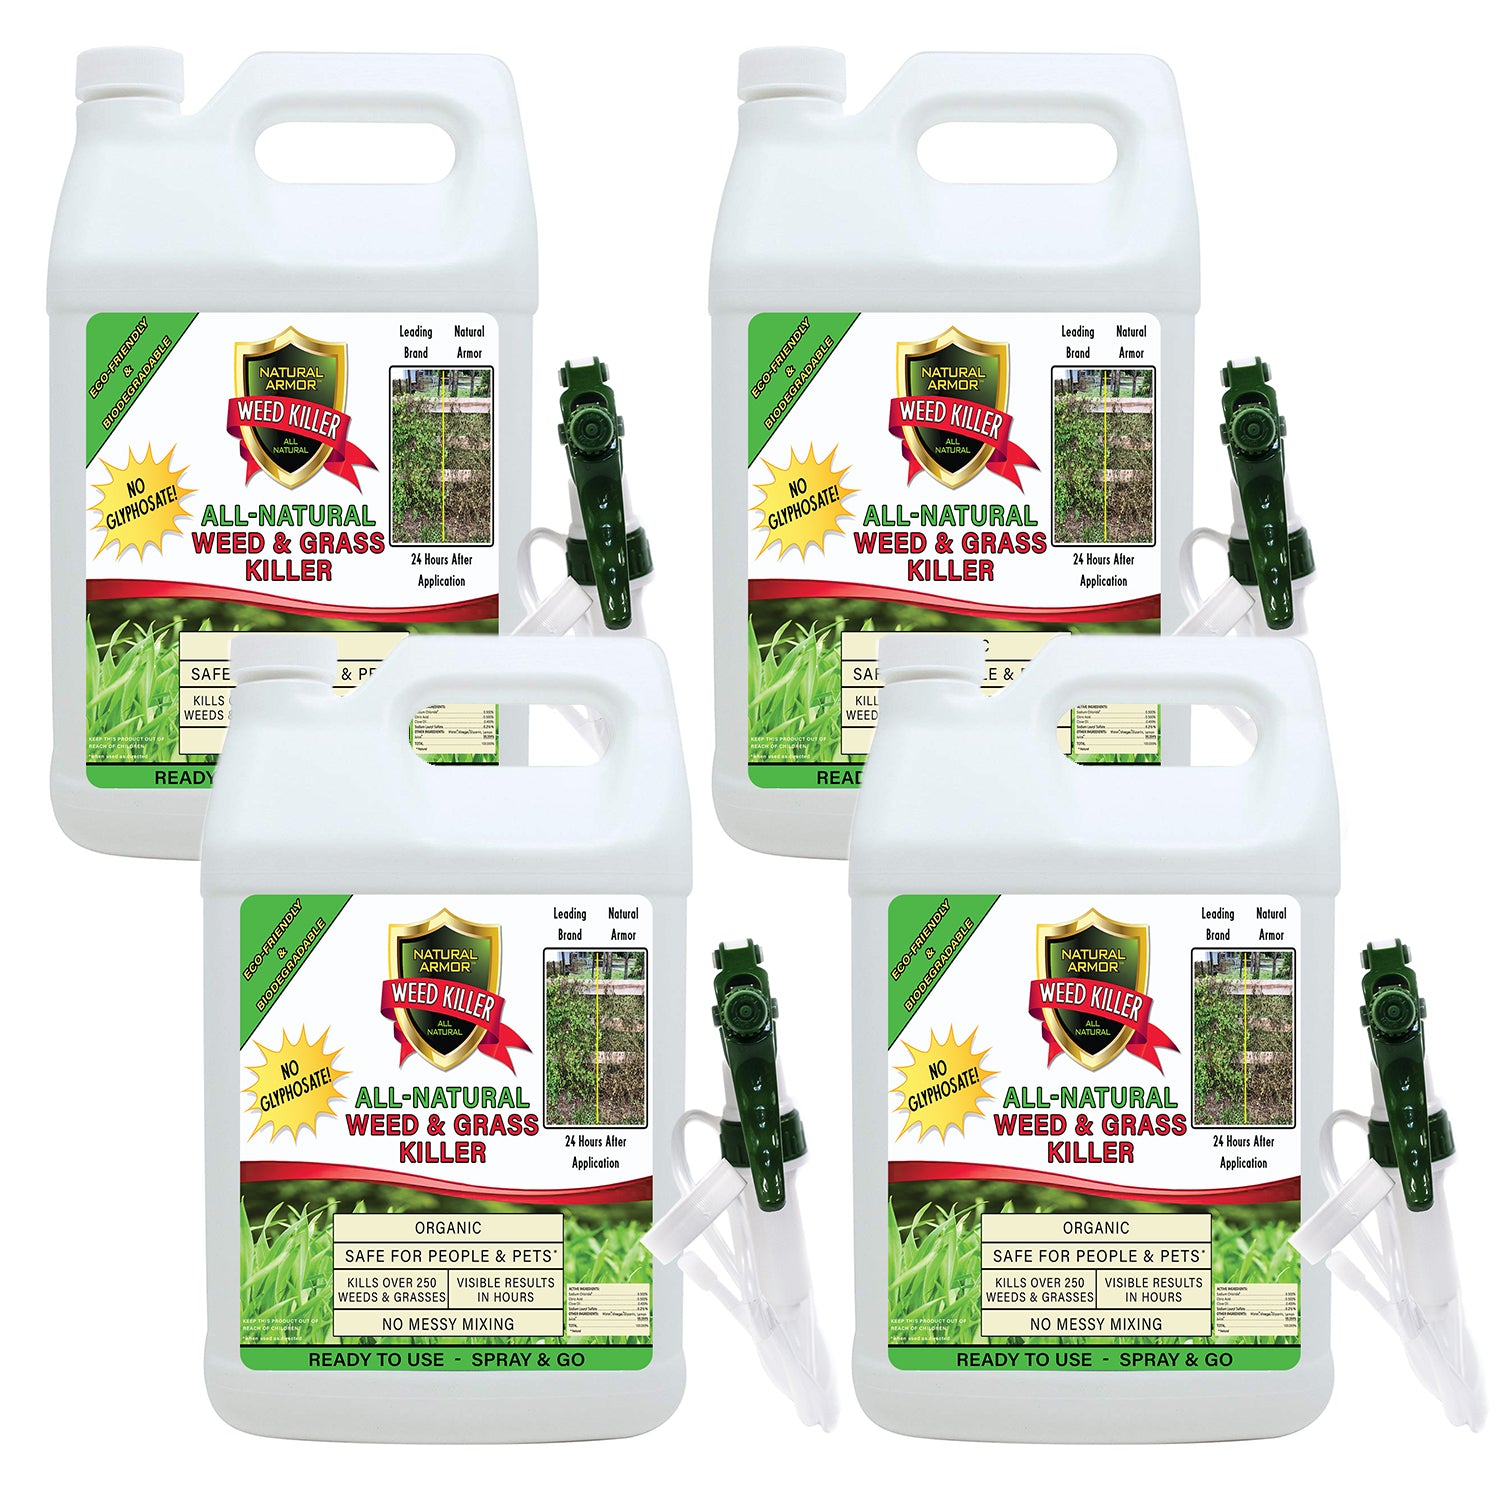 Natural Armor All-Natural Weed Killer - CASE OF 4 GALLONS (Normally $29.95 per gallon, buy 3 gallons get 1 gallon free)